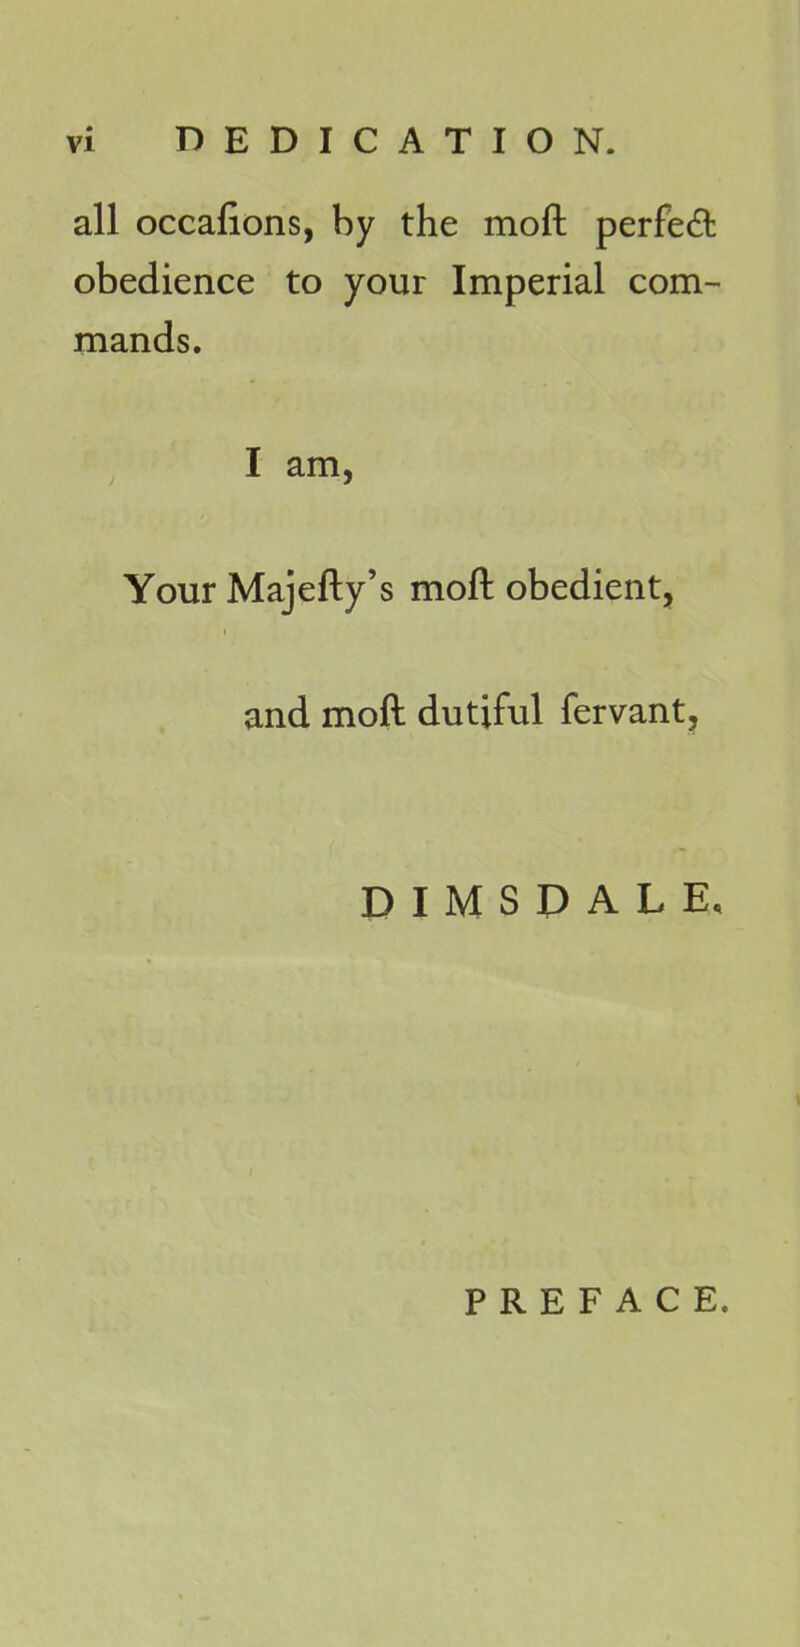 all occafions, by the moft perfect obedience to your Imperial com- mands. I am, Your Majefty's moft obedient, and moft dutiful fervant. D I M S P A L E, PREFACE.